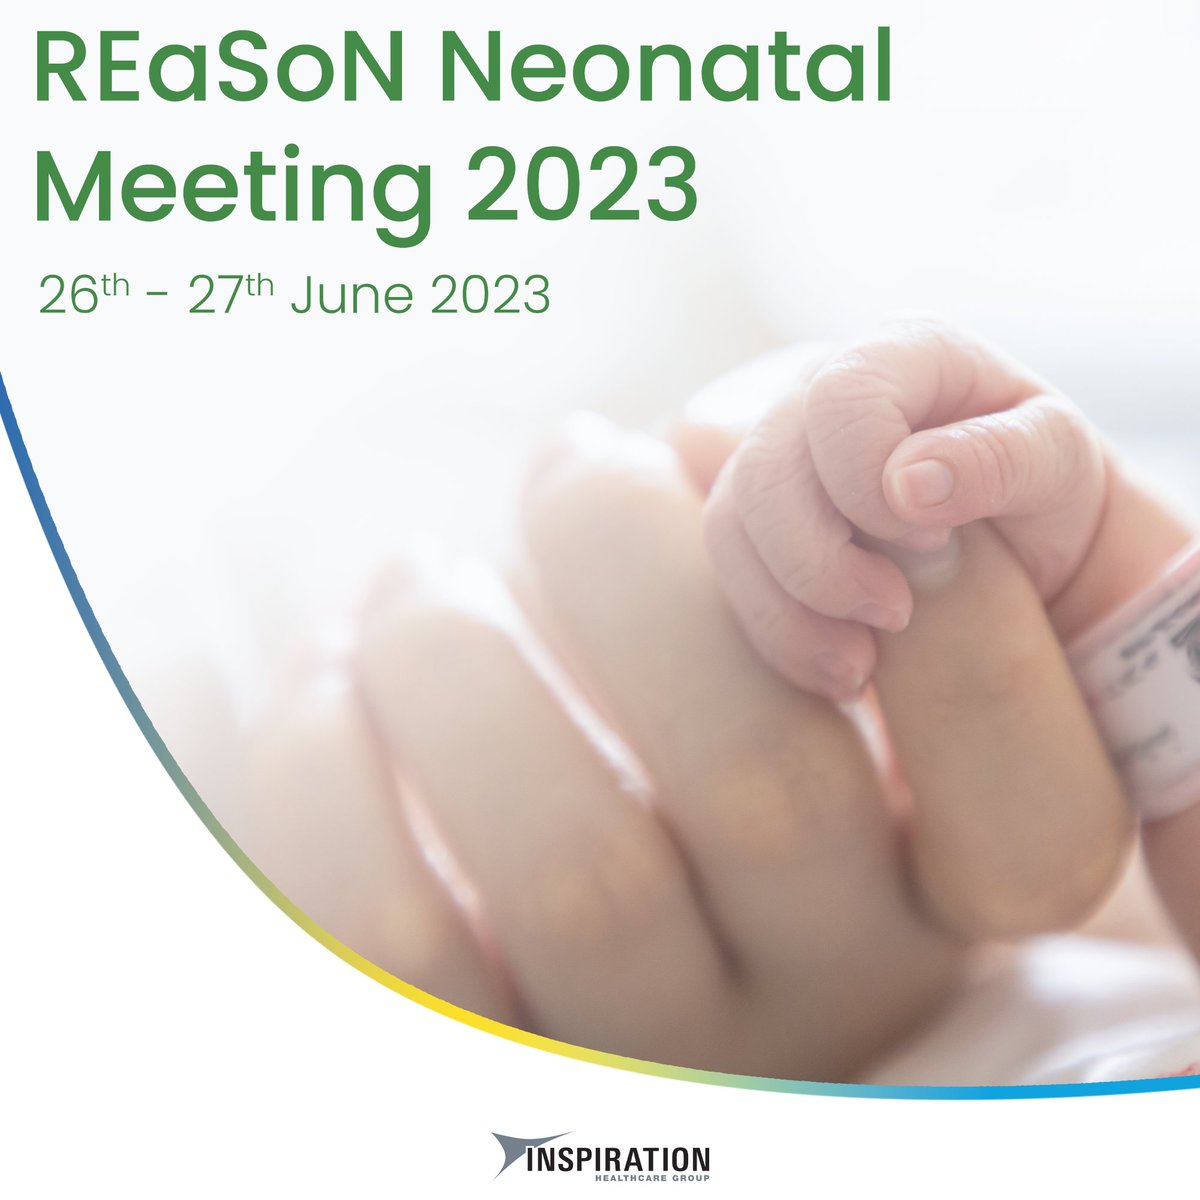 Today, IHCGroup kicks off our participation as gold sponsors at the highly anticipated 2023 REaSoN meeting! 📅

Discover our new SLE6000 ventilator range and LifeStart™ firsthand.

We look forward to seeing all of you who are attending there!

#WeAreInspiration #reason2023